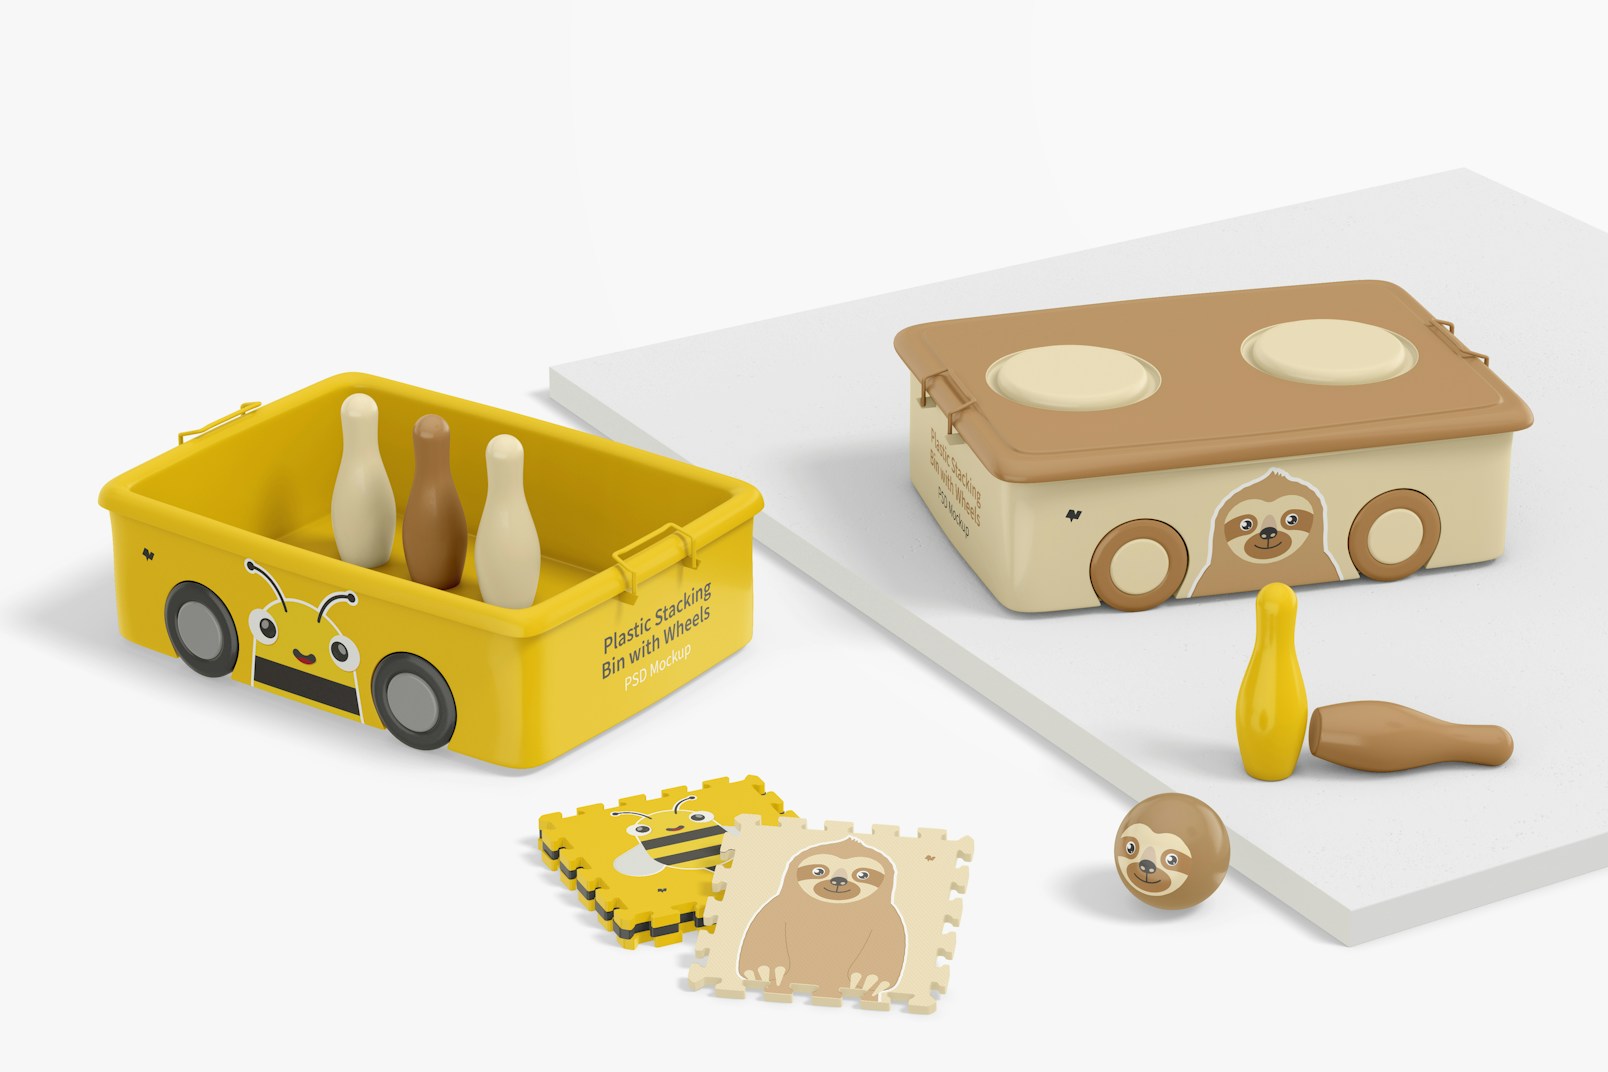 Small Plastic Stacking Bin with Wheels and Toys Mockup